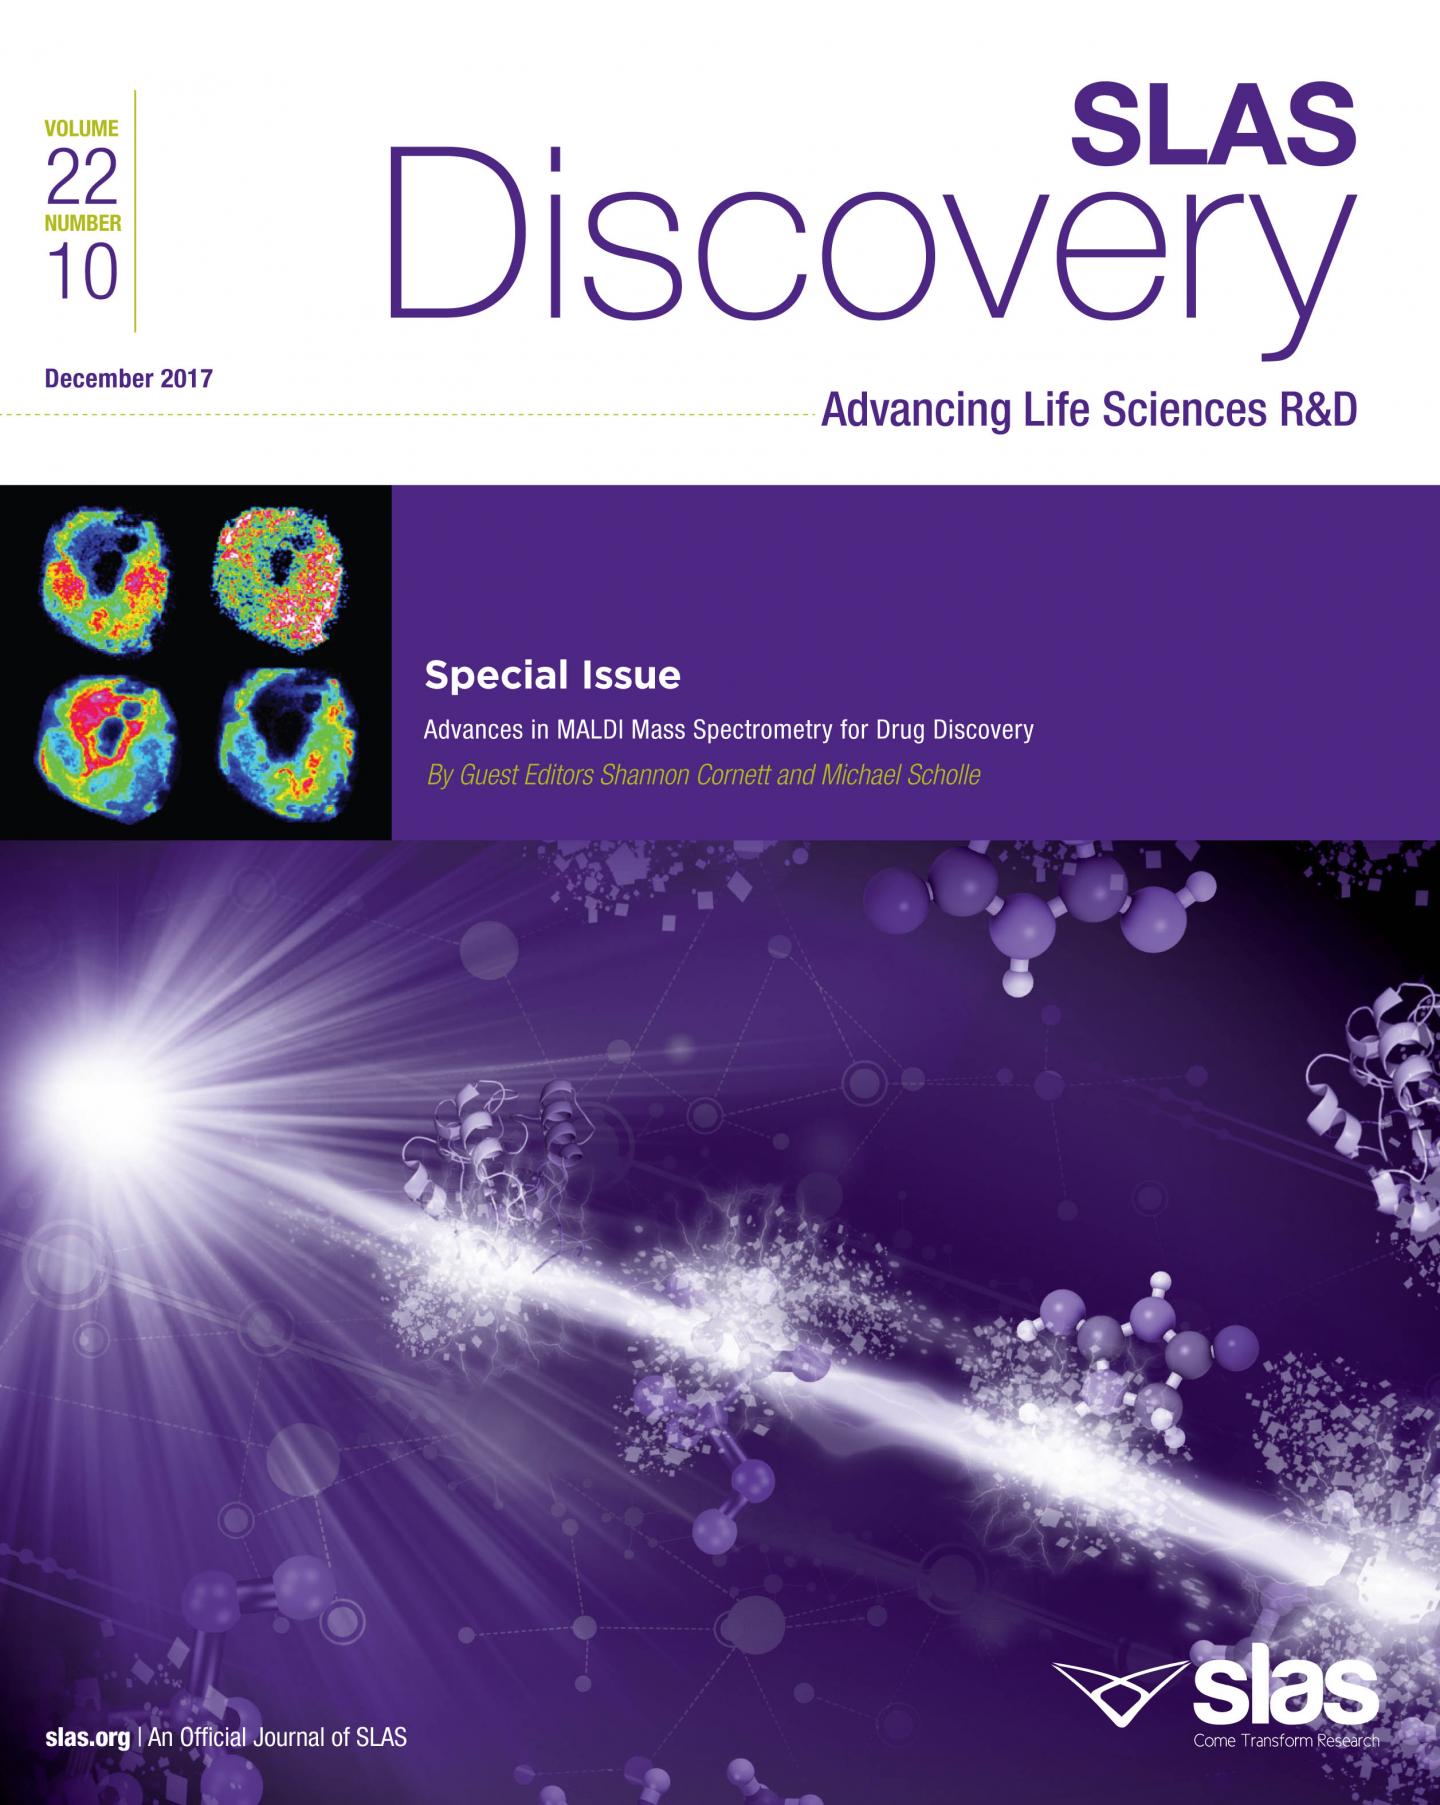 Advances in MALDI Mass Spectrometry within Drug Discovery